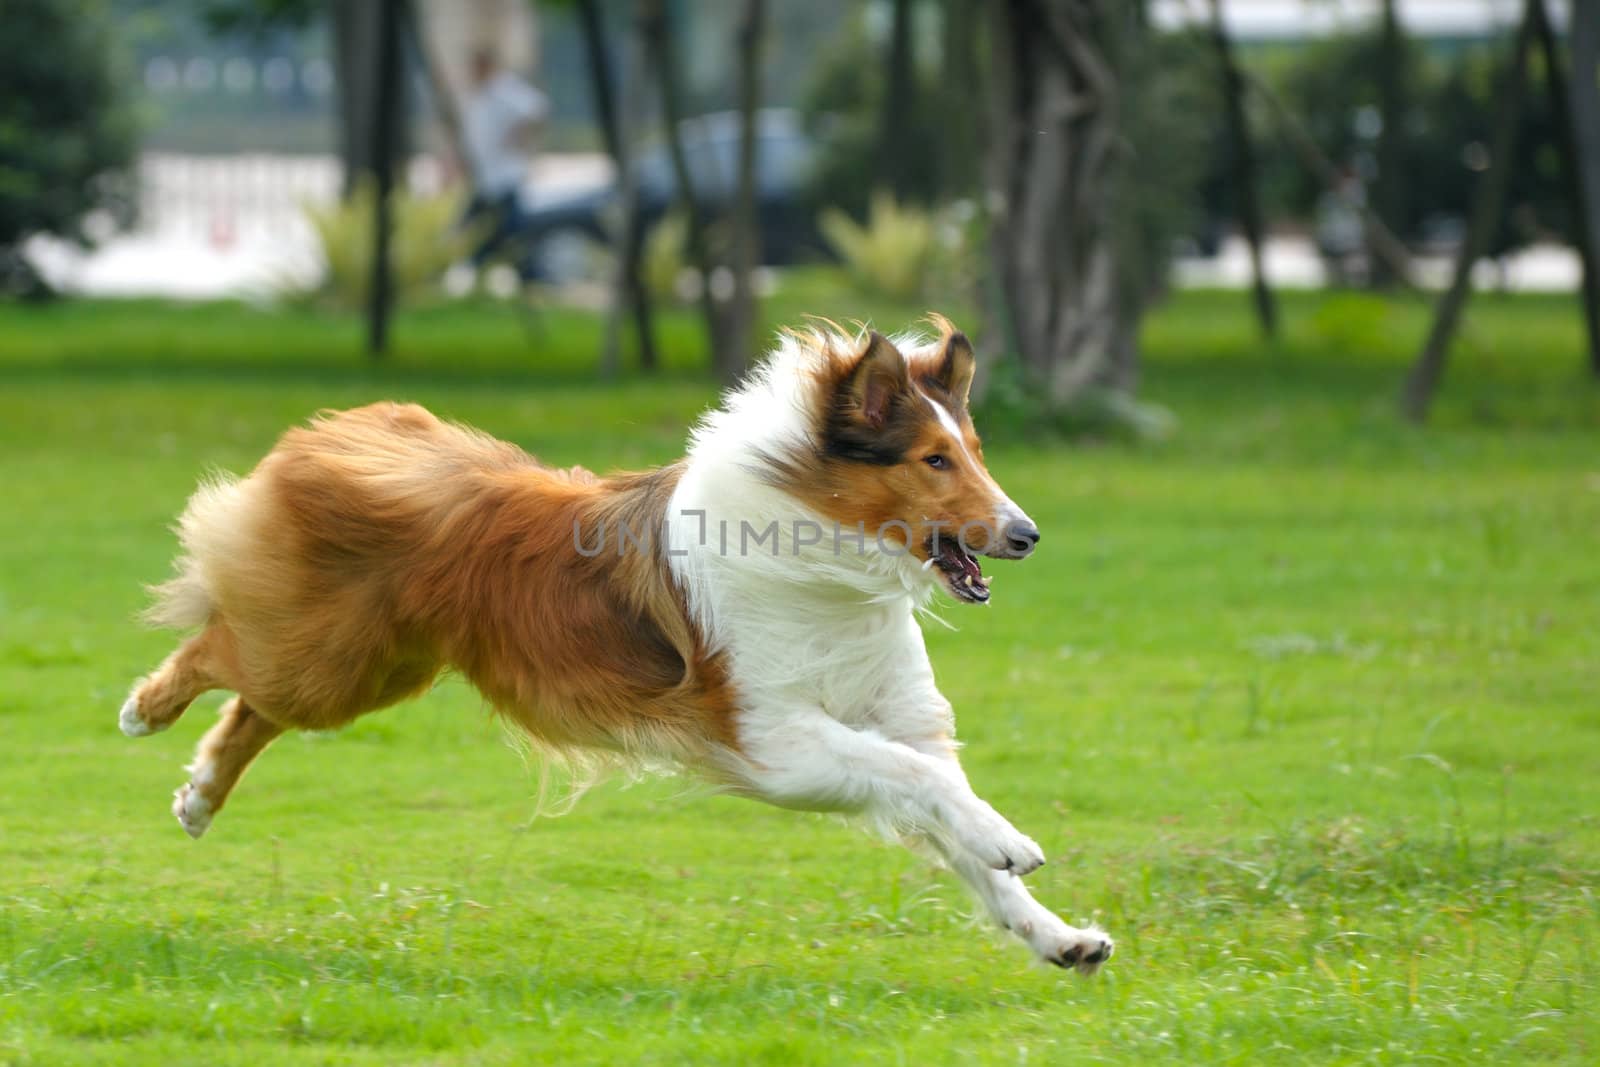 Collie dog running on the lawn